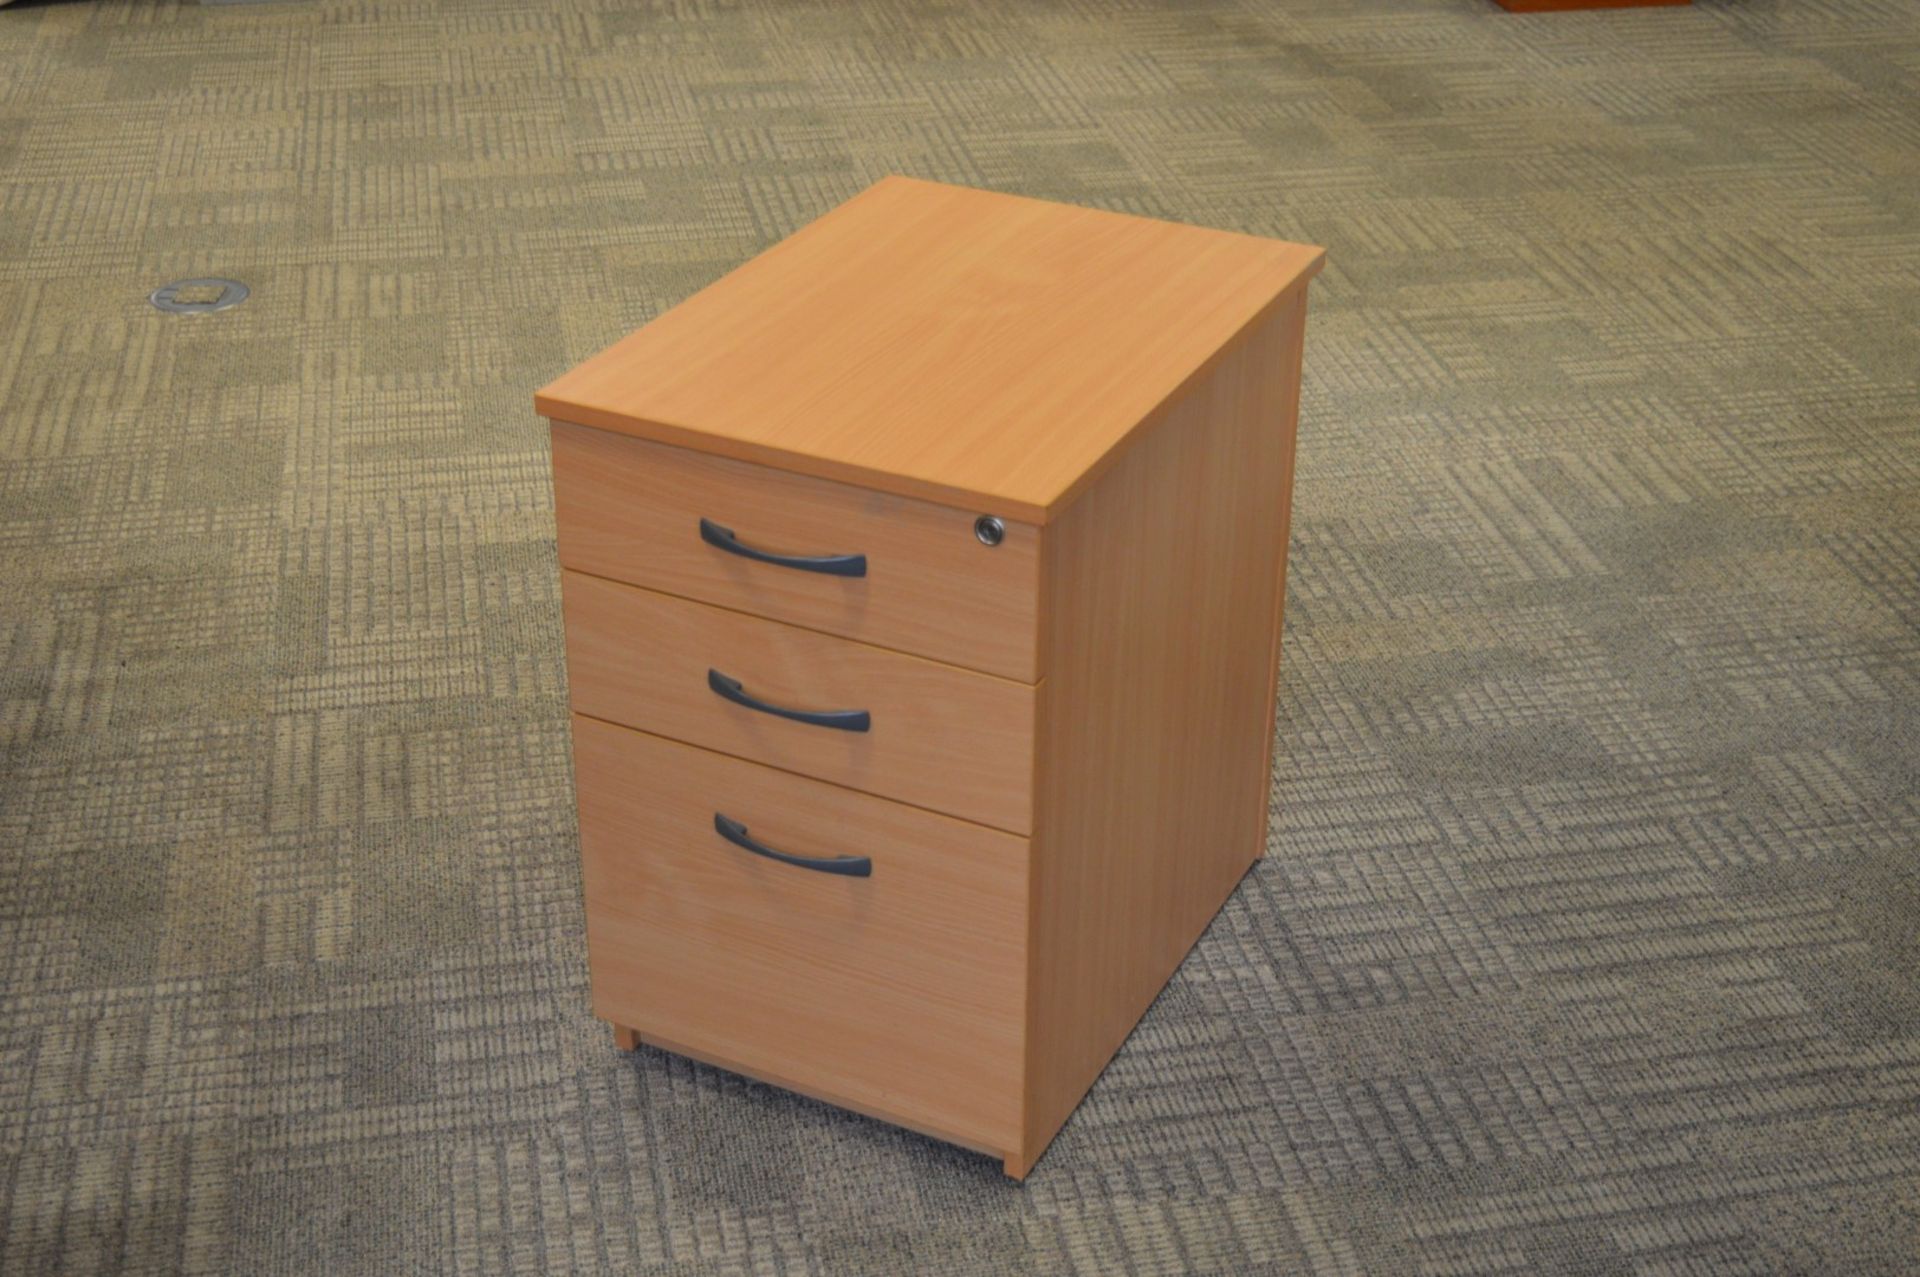 1 x Three Drawer Mobile Pedestal Drawers - With Key - Modern Beech Finish - Two Storage Drawers - Image 4 of 7